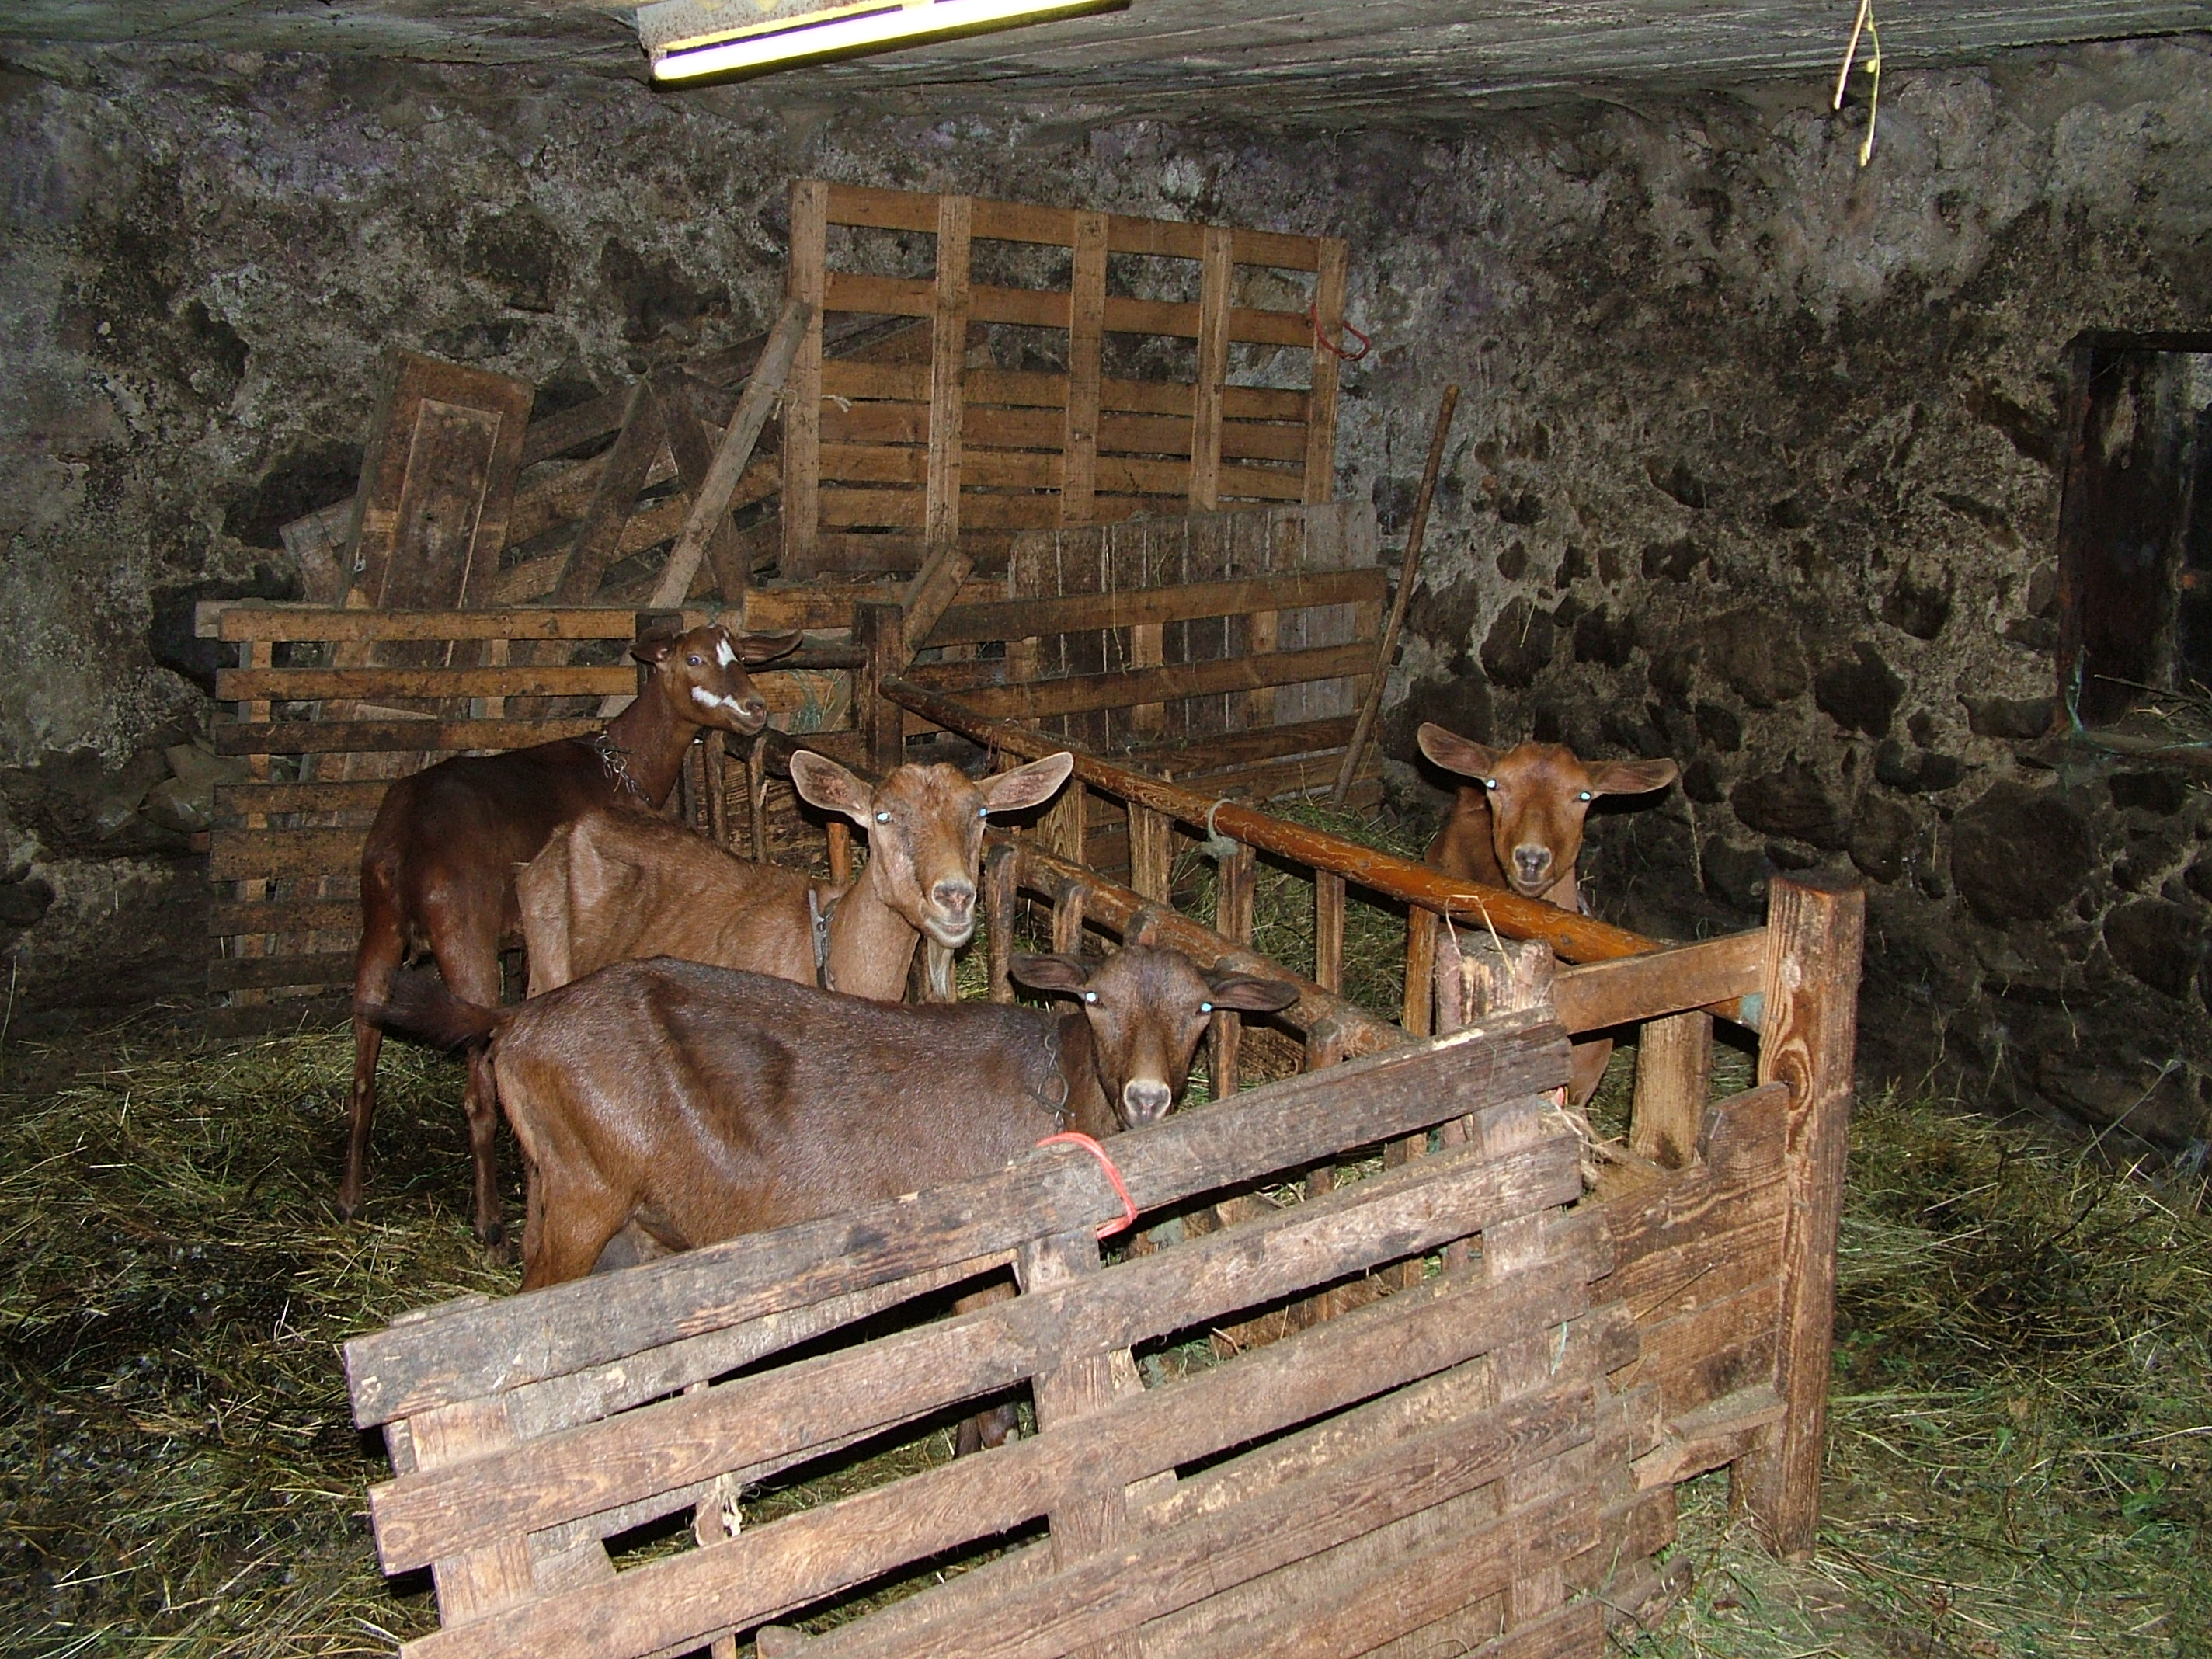 Goats in their shed